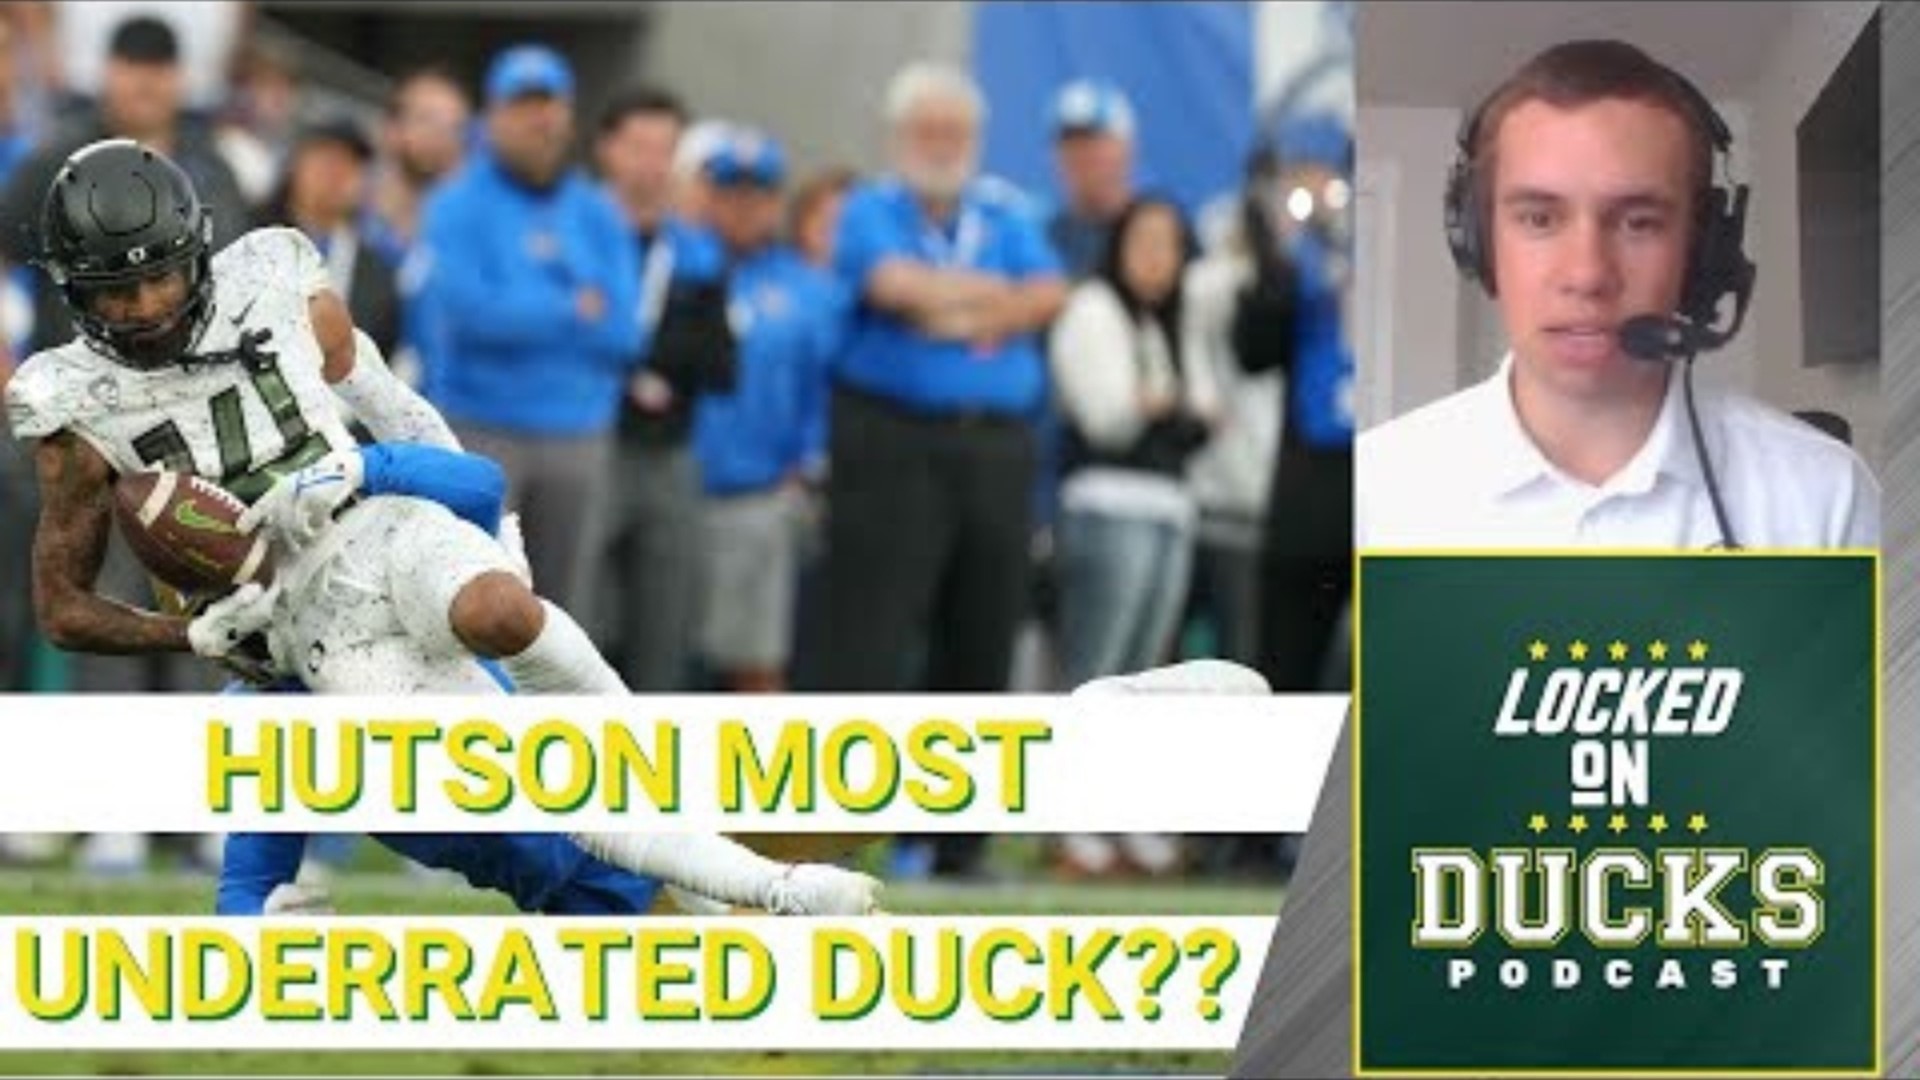 A look at some Oregon players whose potential impact has been underrated by fans and the media going into 2022, including wide receiver Kris Hutson.